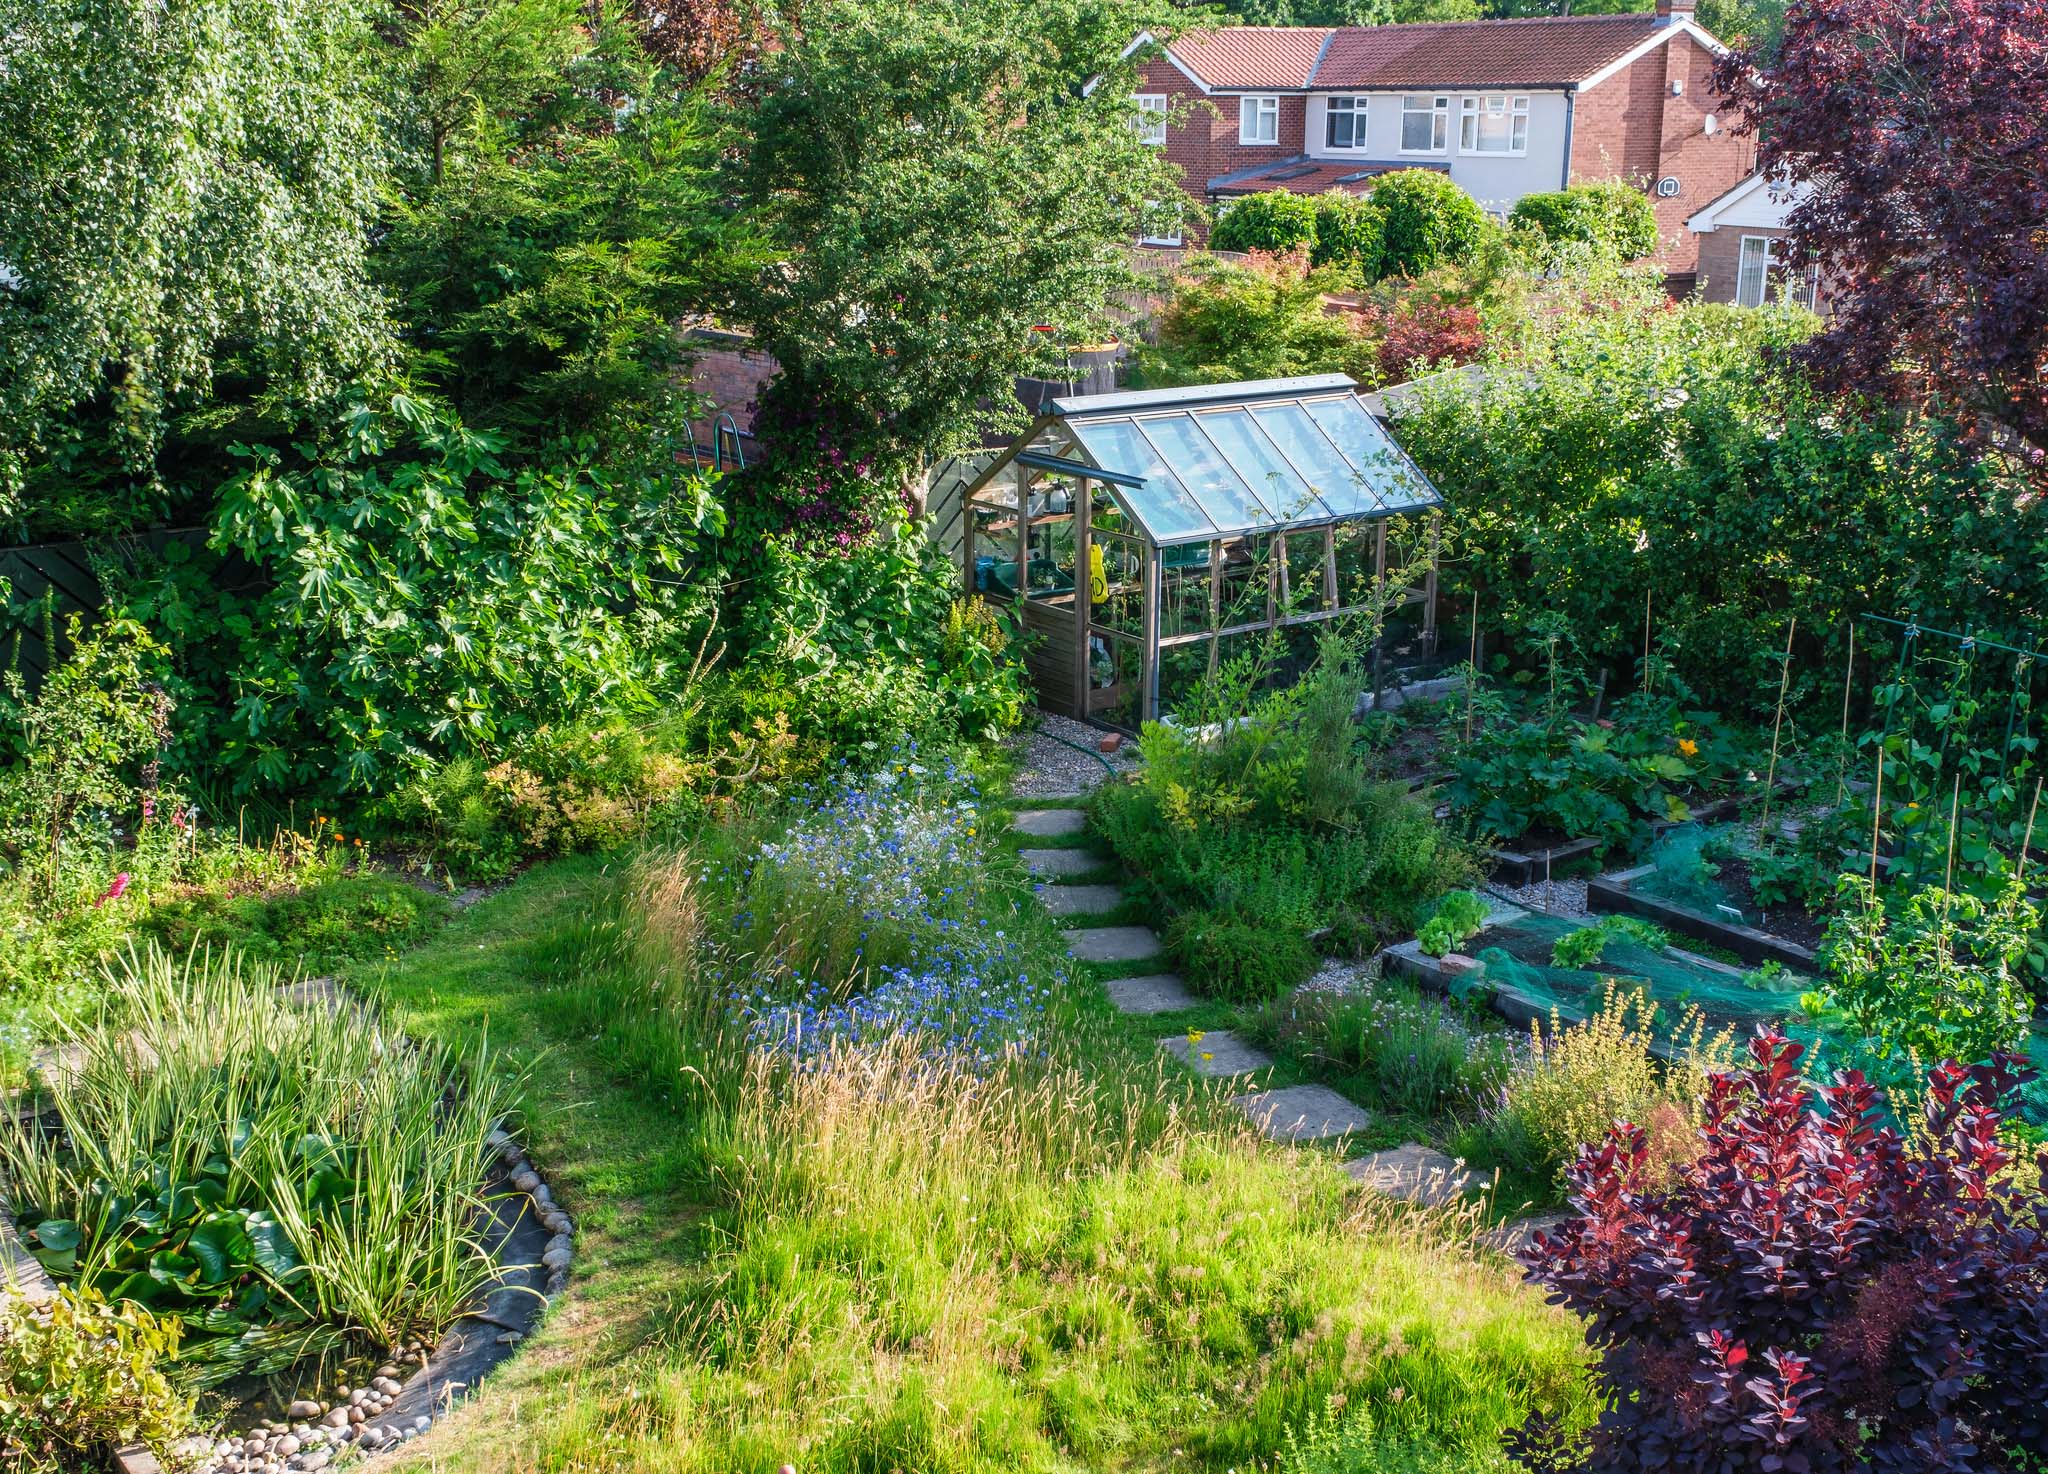 A densely planted and very inviting backyard garden and greenhouse 